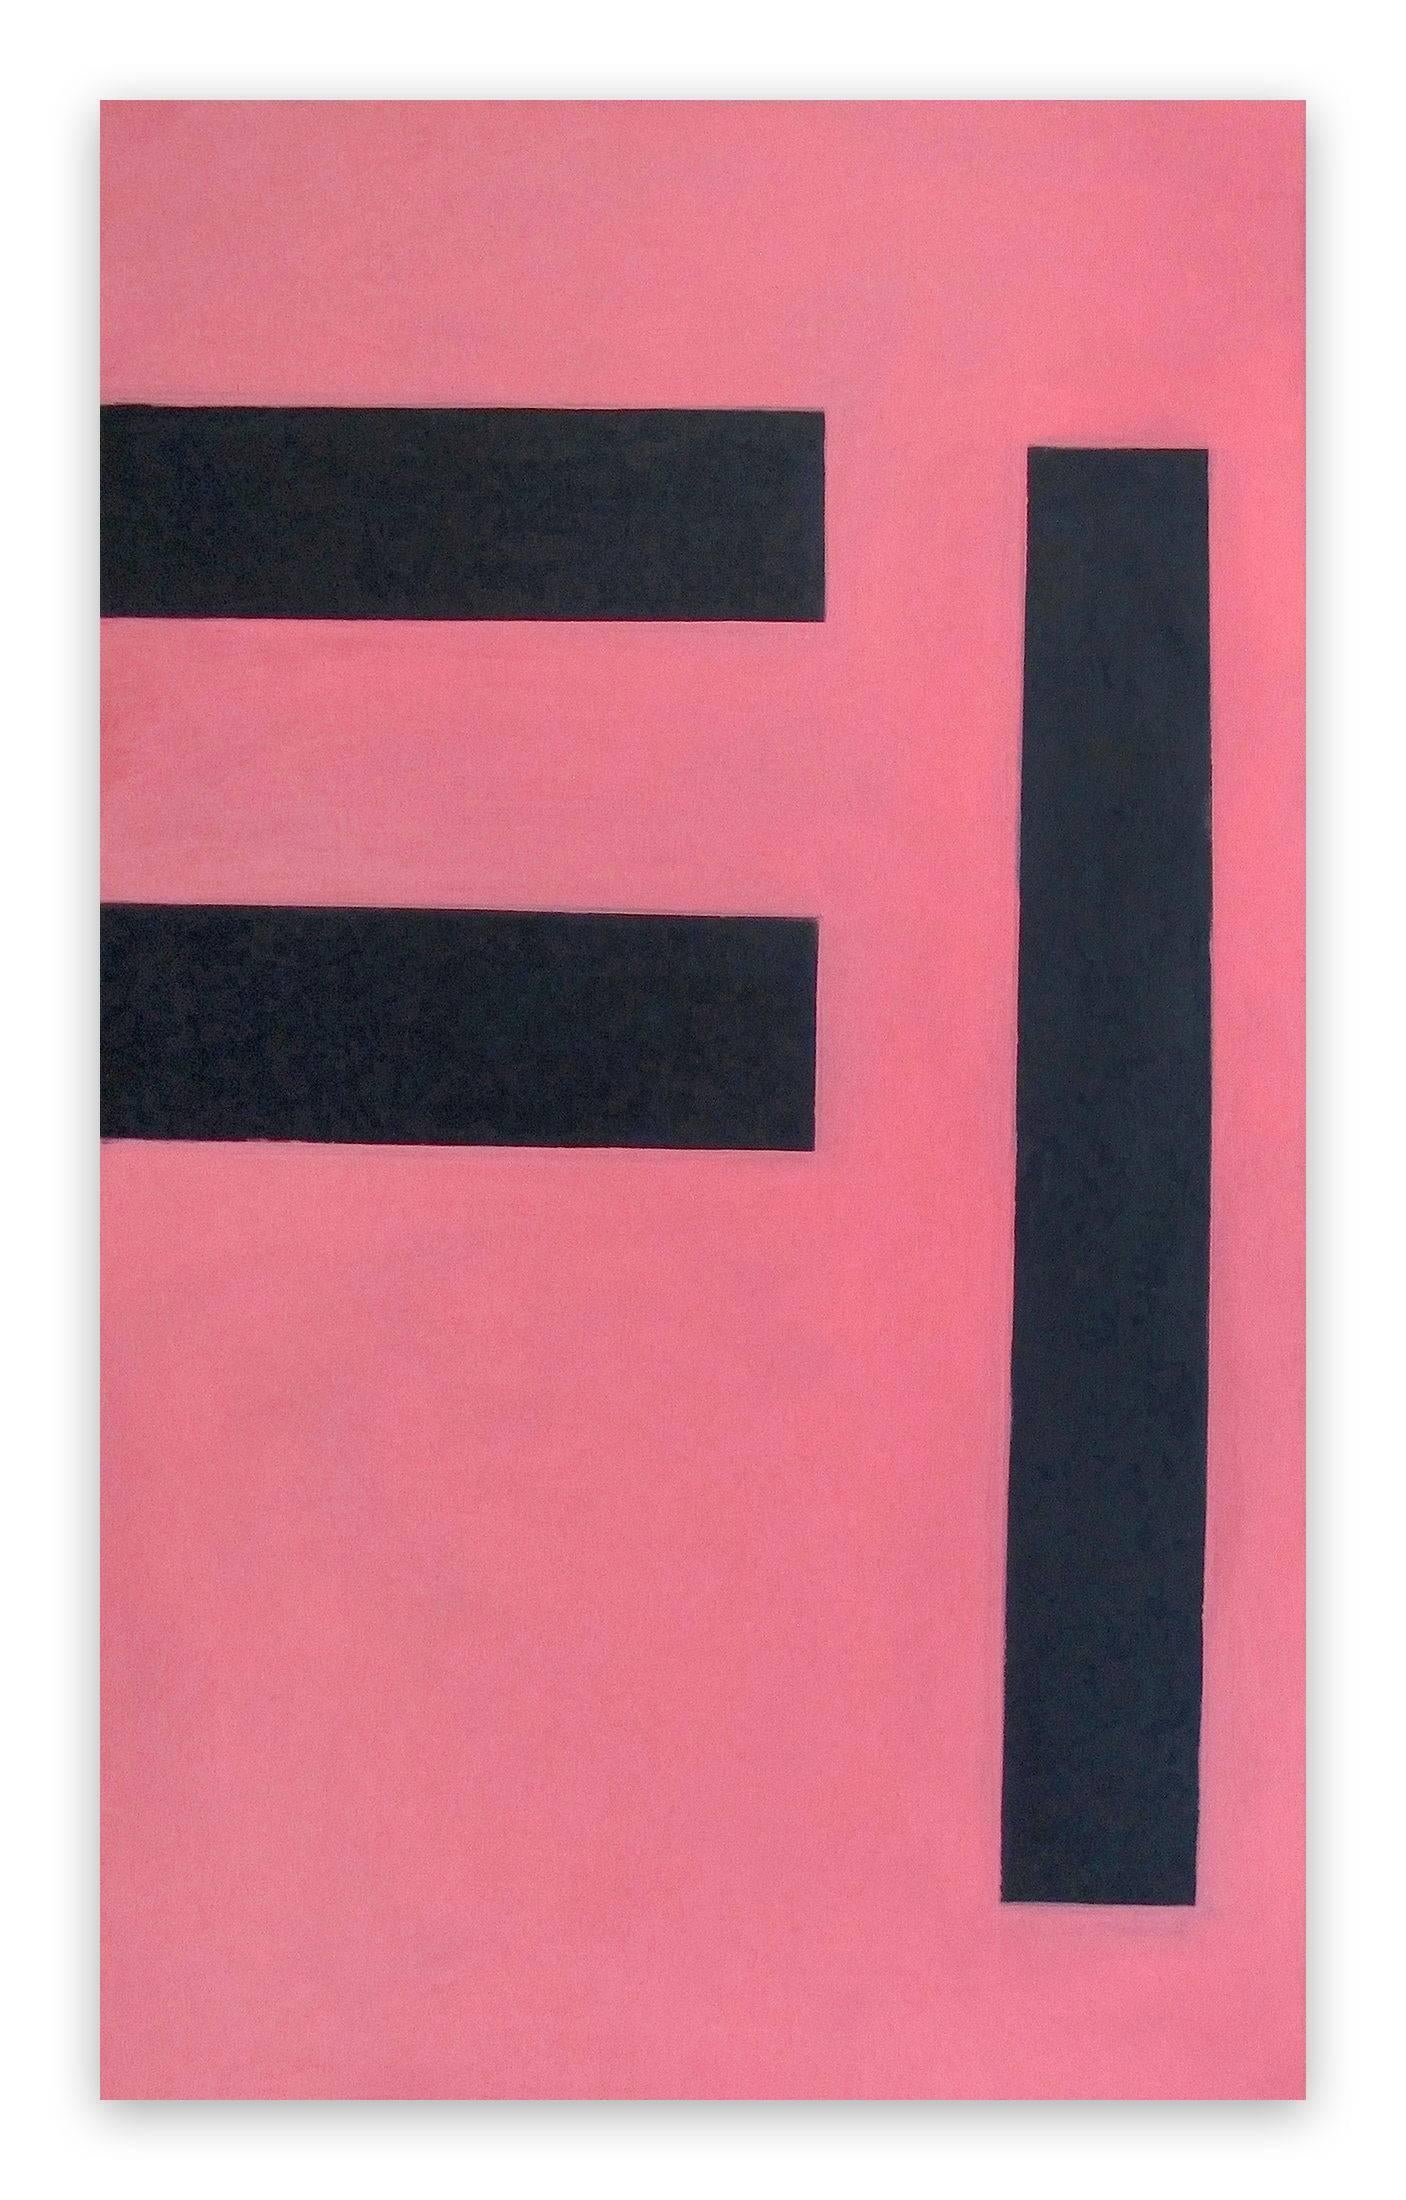 Untitled 2 (Pink) 1992 (Abstract Painting)

Acrylic on pavatex - Unframed

This work is one of two earlier works consisting of brush acrylic painted pavatex.

The pavatex surface is flat, the painted motive is handmade without using tape for hard